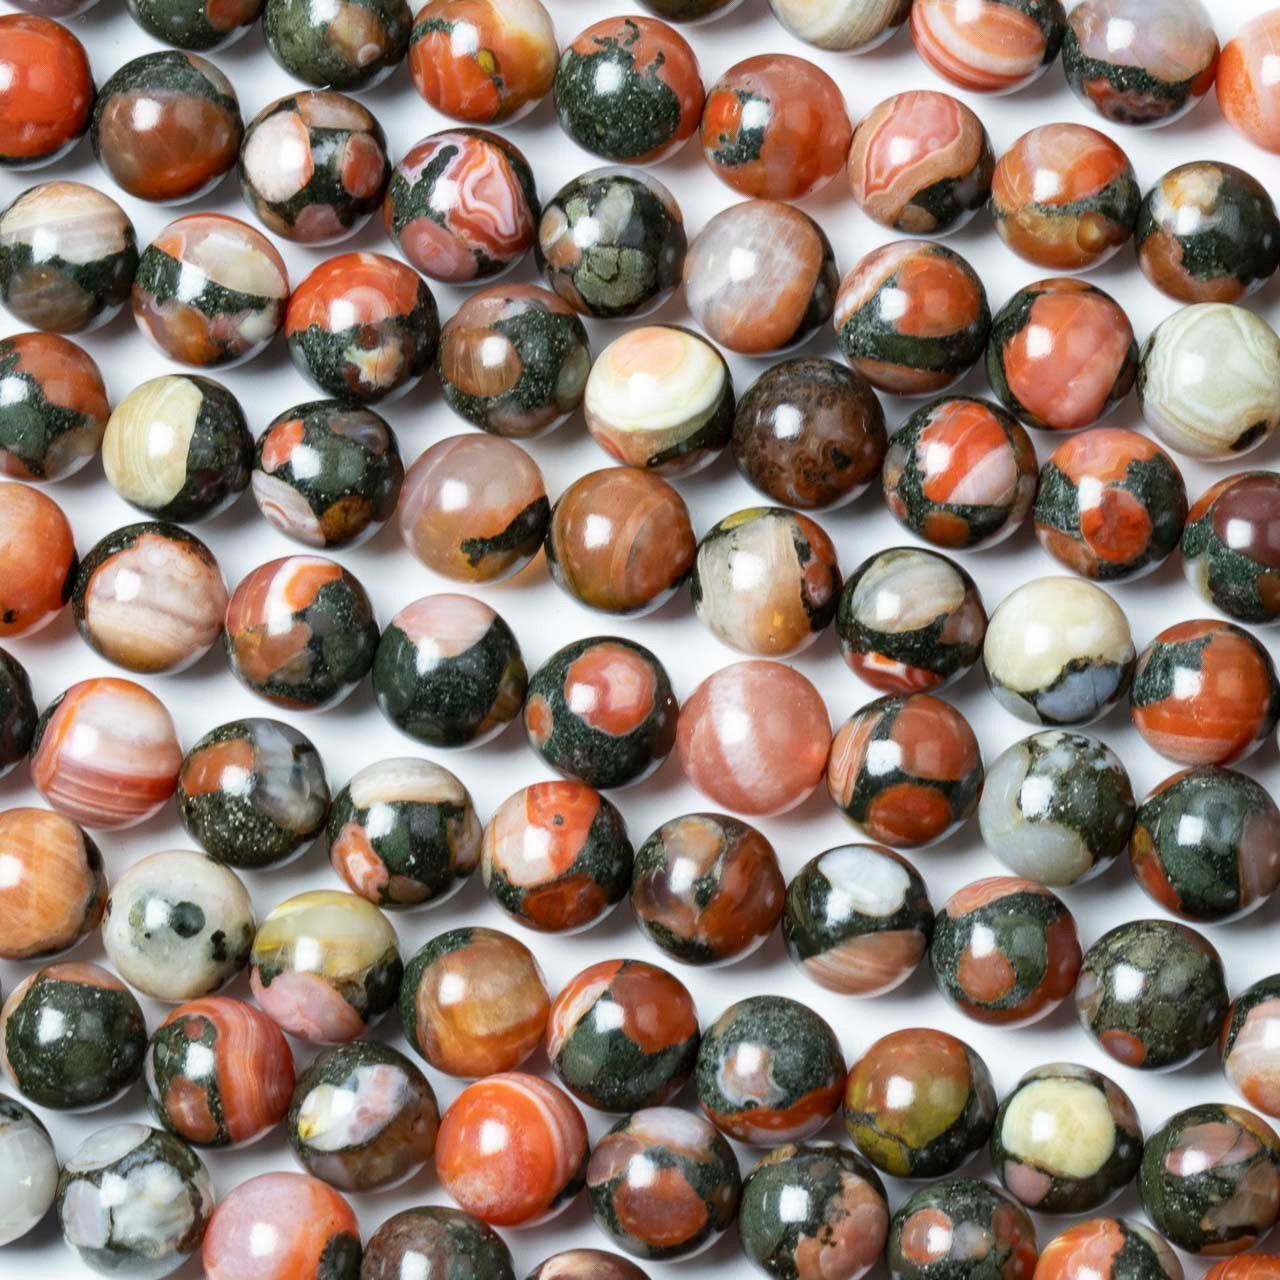 8mm Natural Red Agate Beads Round